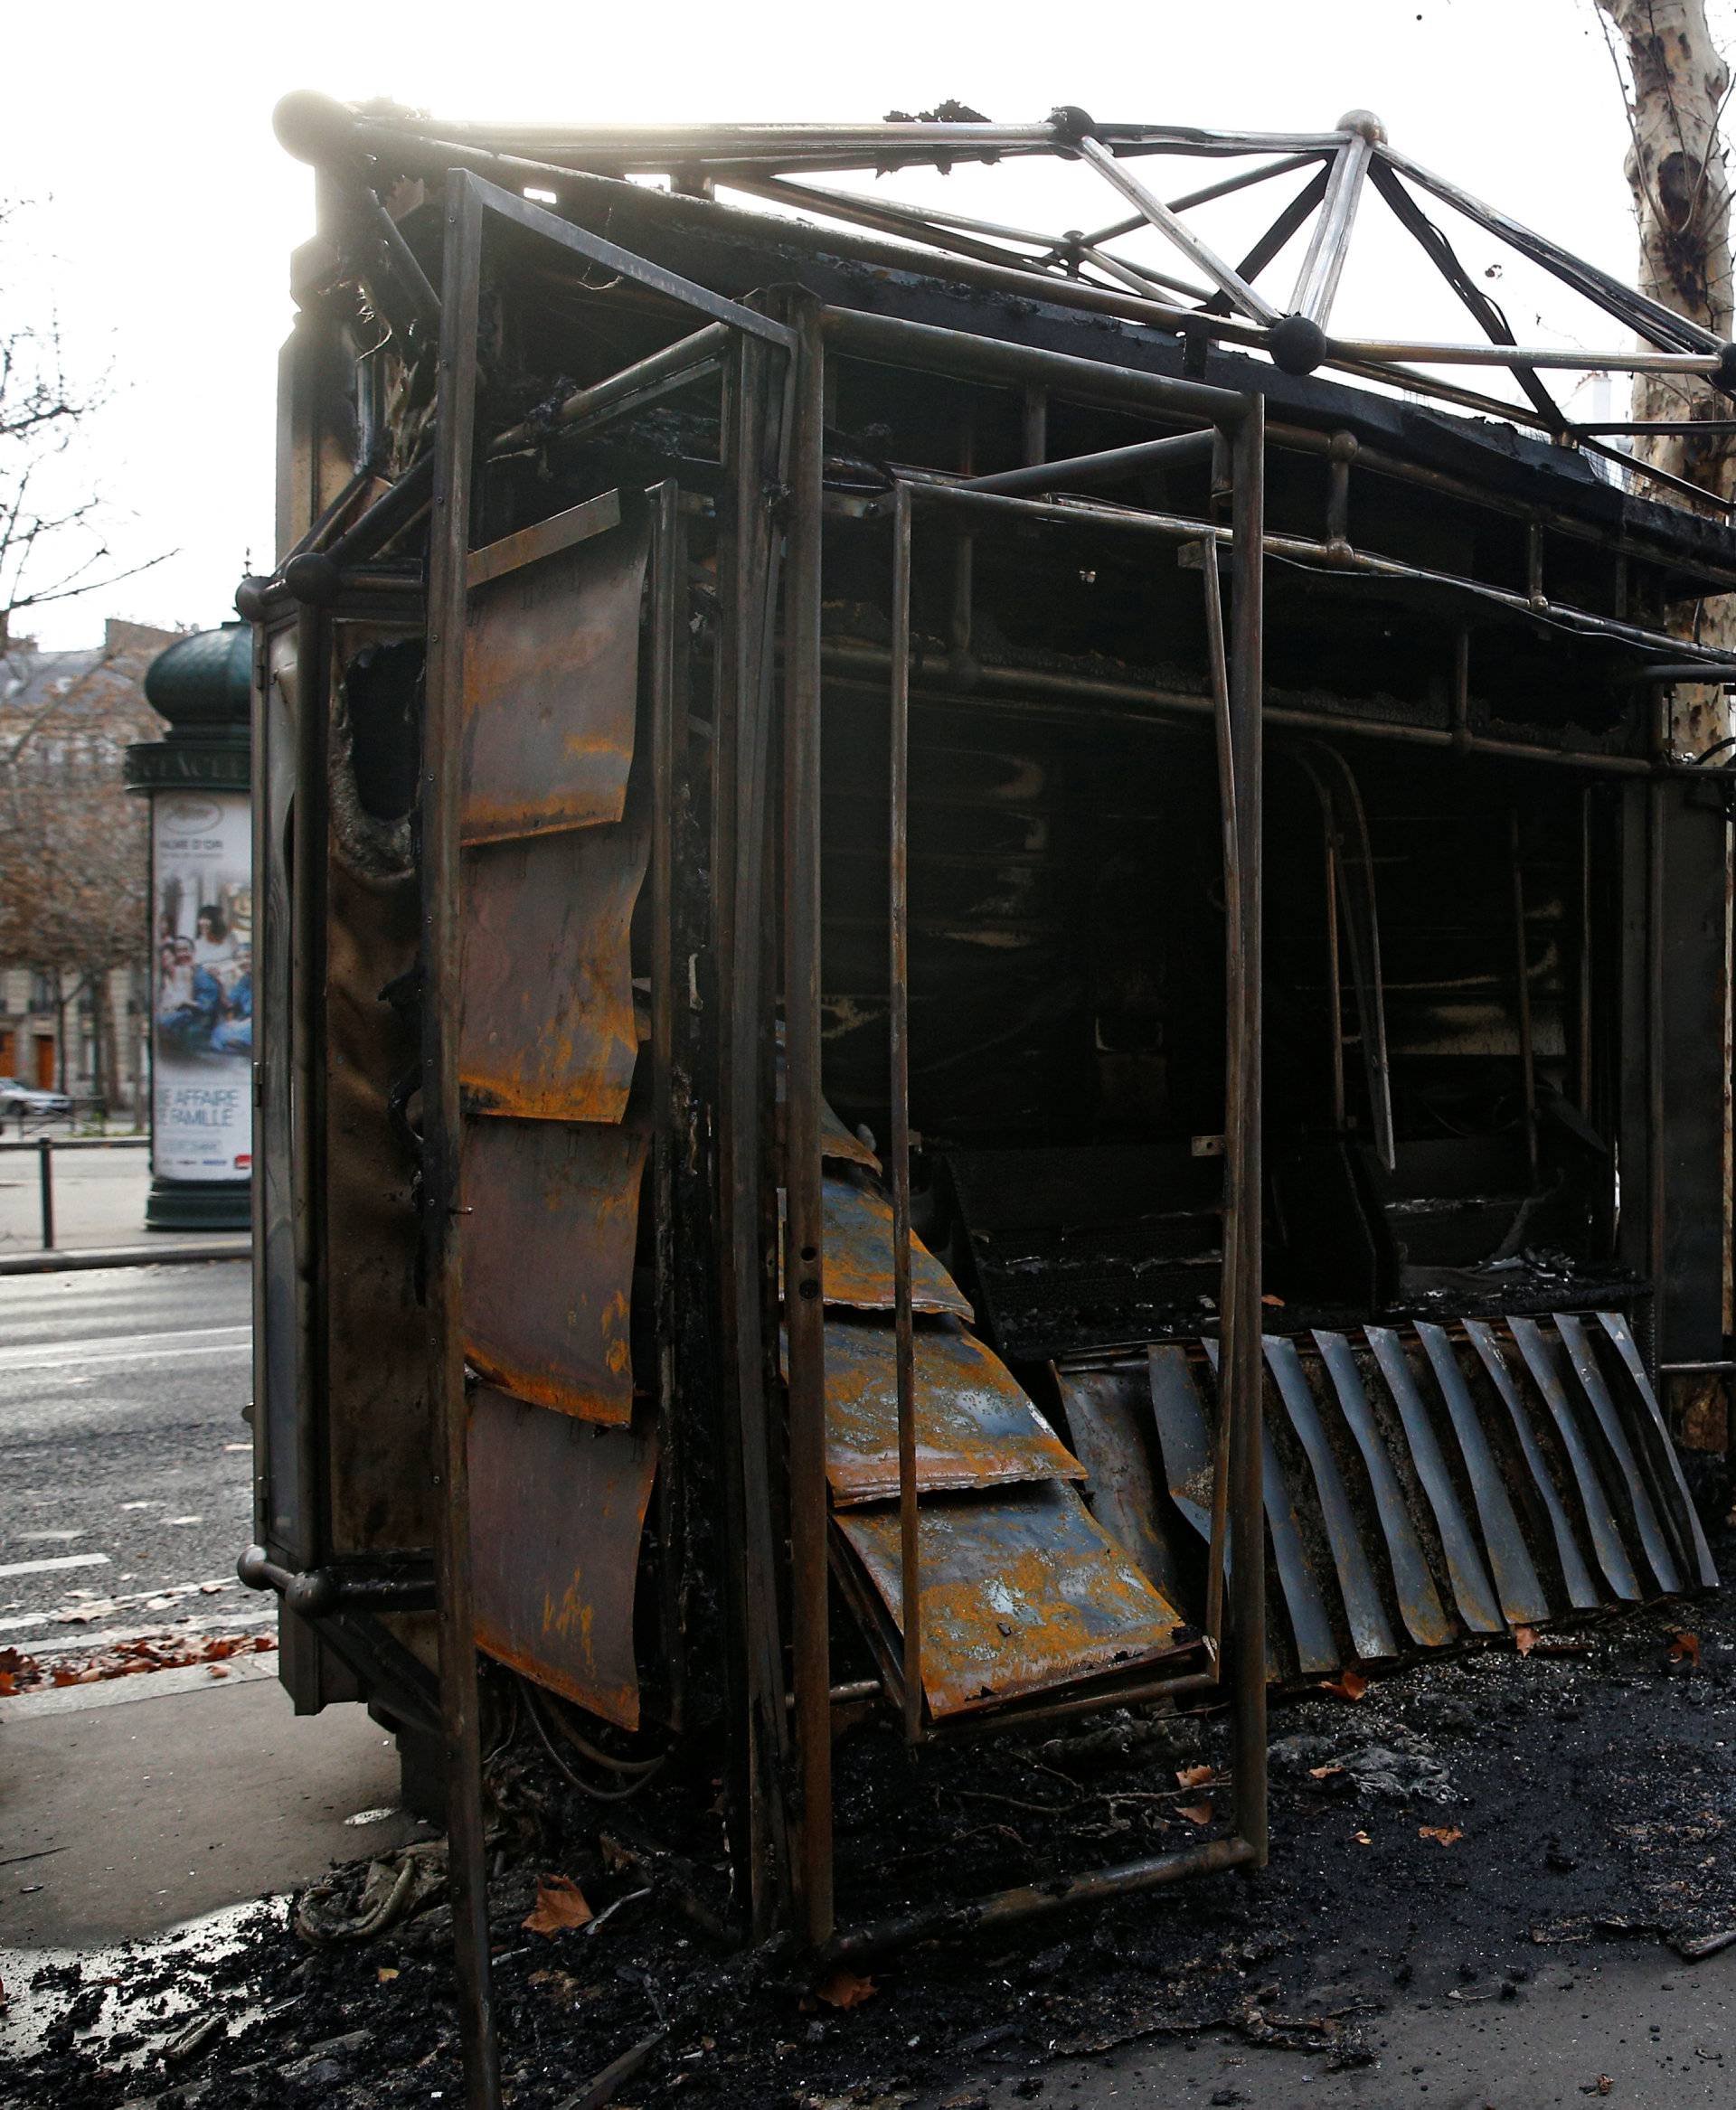 A vandalized news stand is seen the day after clashes during a national day of protest by the "yellow vests" movement in Paris